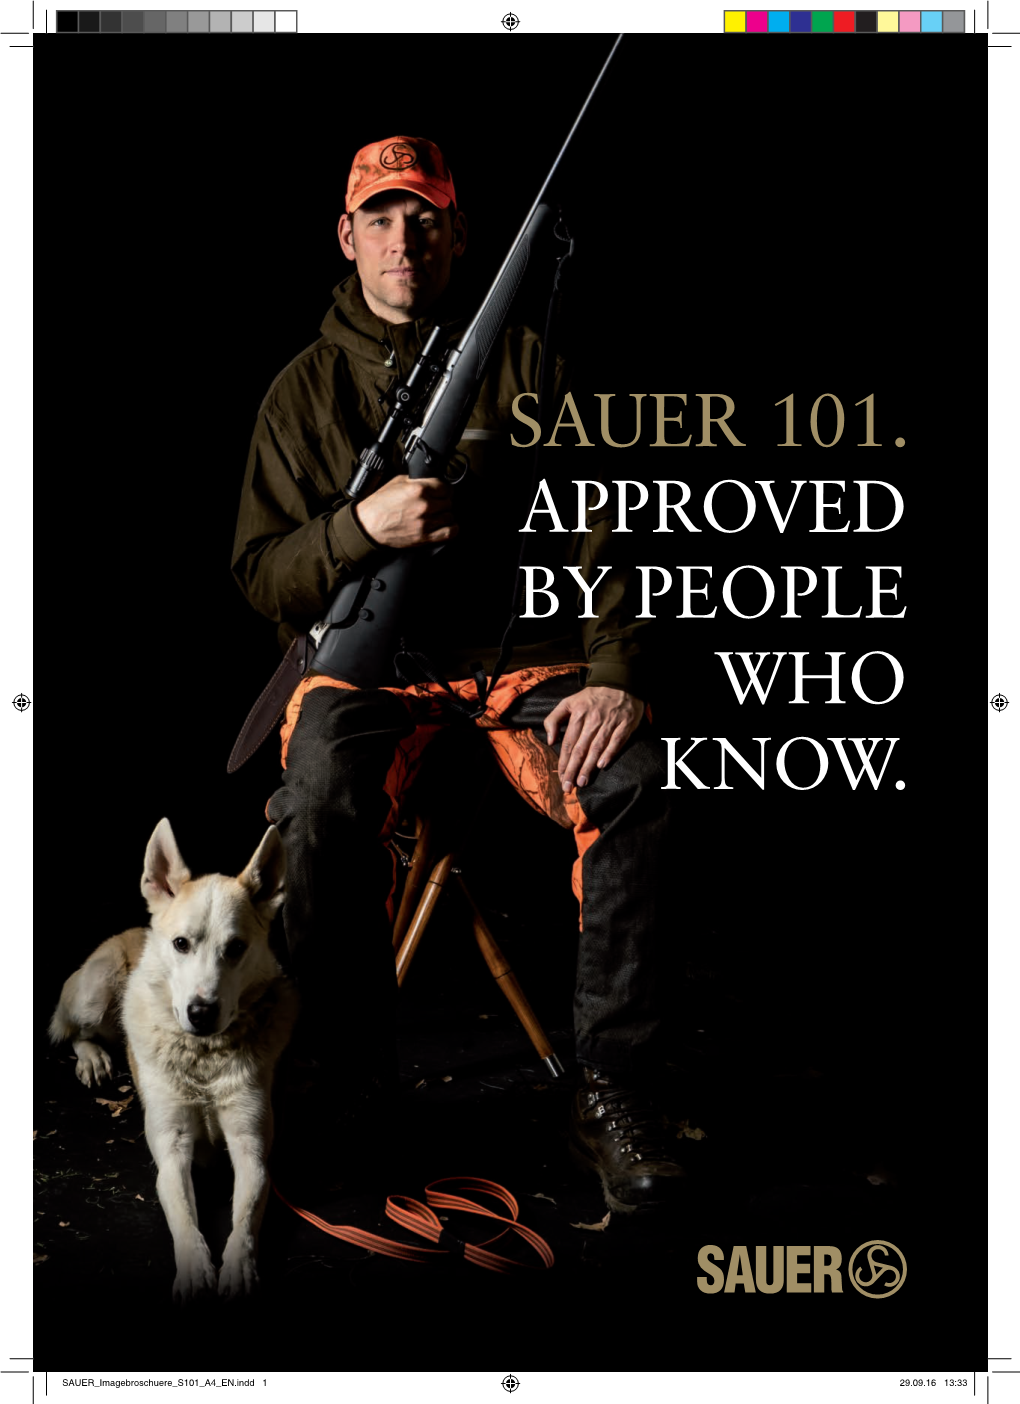 Sauer 101. Approved by People Who Know